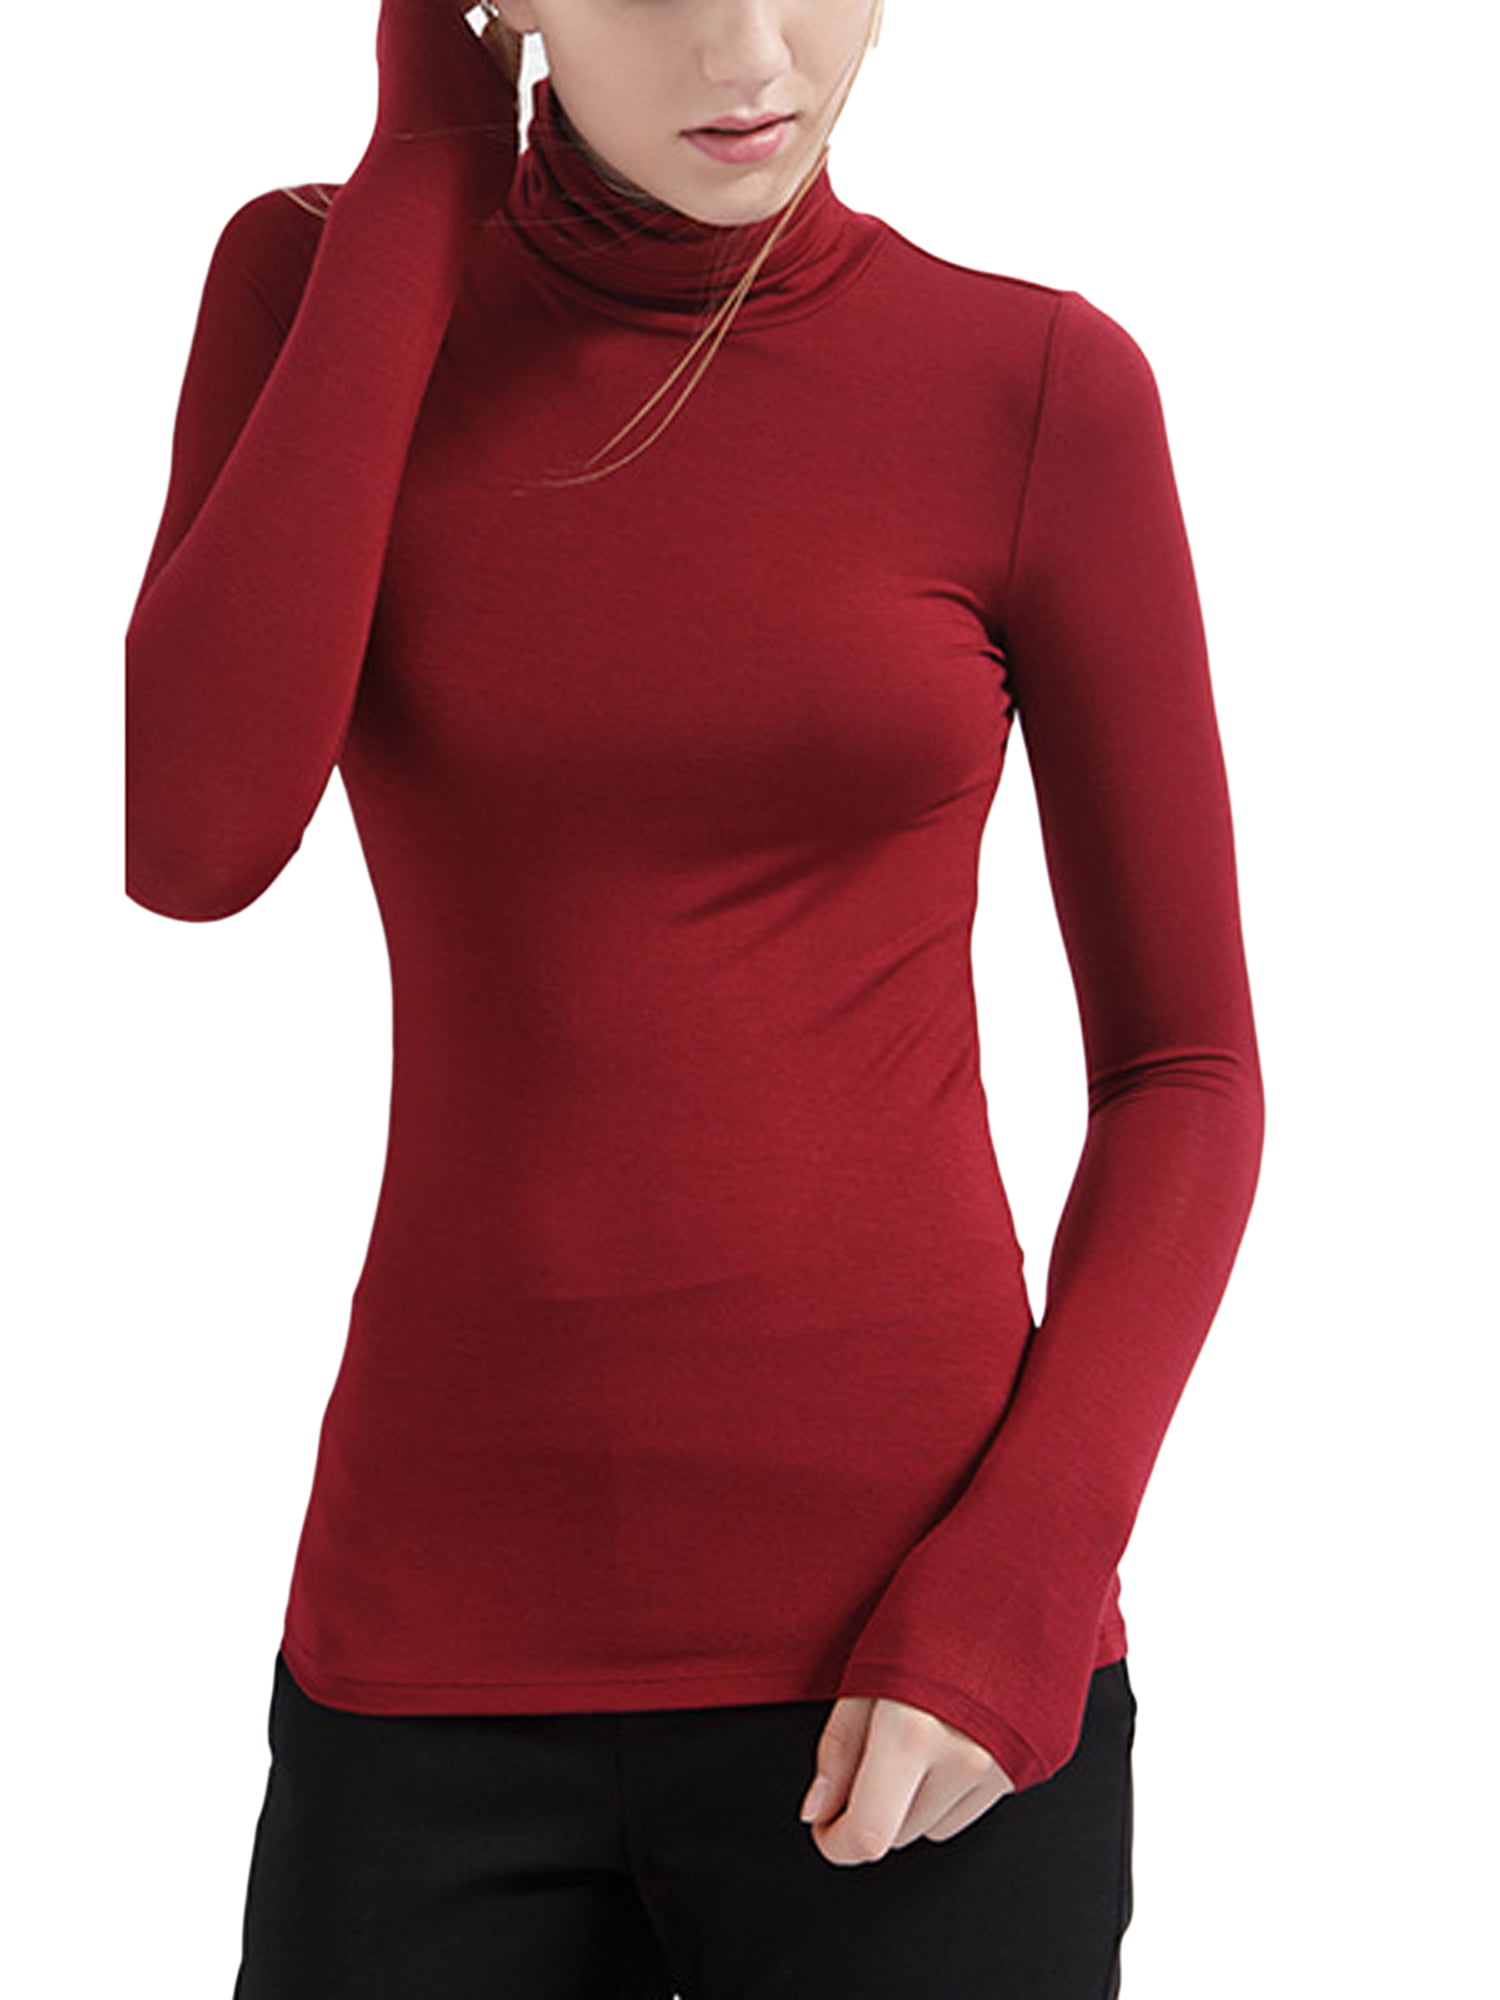 Shirts Layer Base Stretchy Modal Women\'s Tops Base Long Pullover, Soft Slim Musuos Fitted Sleeve Turtleneck